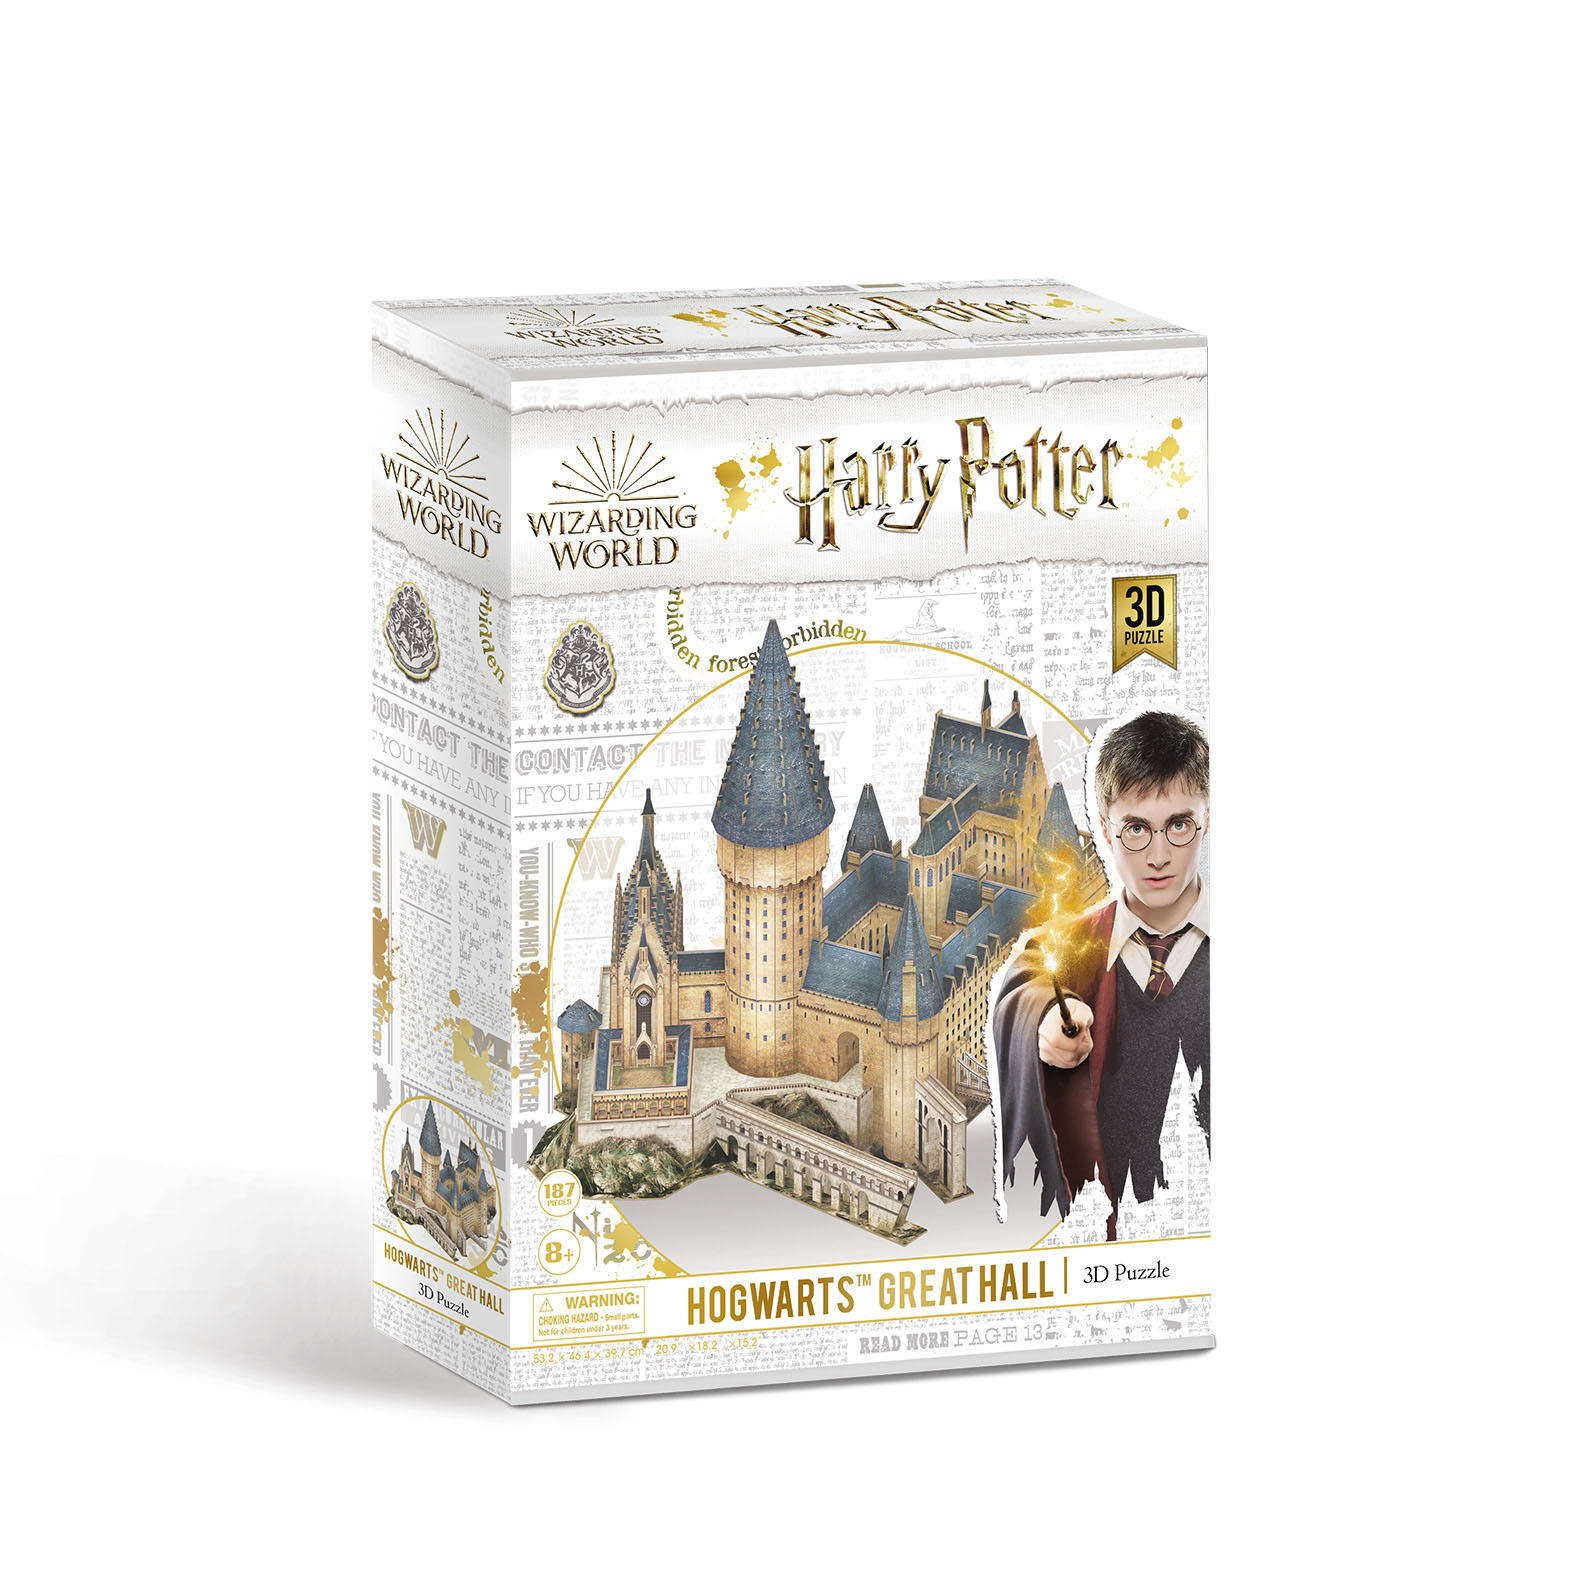 Hall REVELL Harry Mehrfarbig Puzzle, Great 3D Hogwarts™ Potter